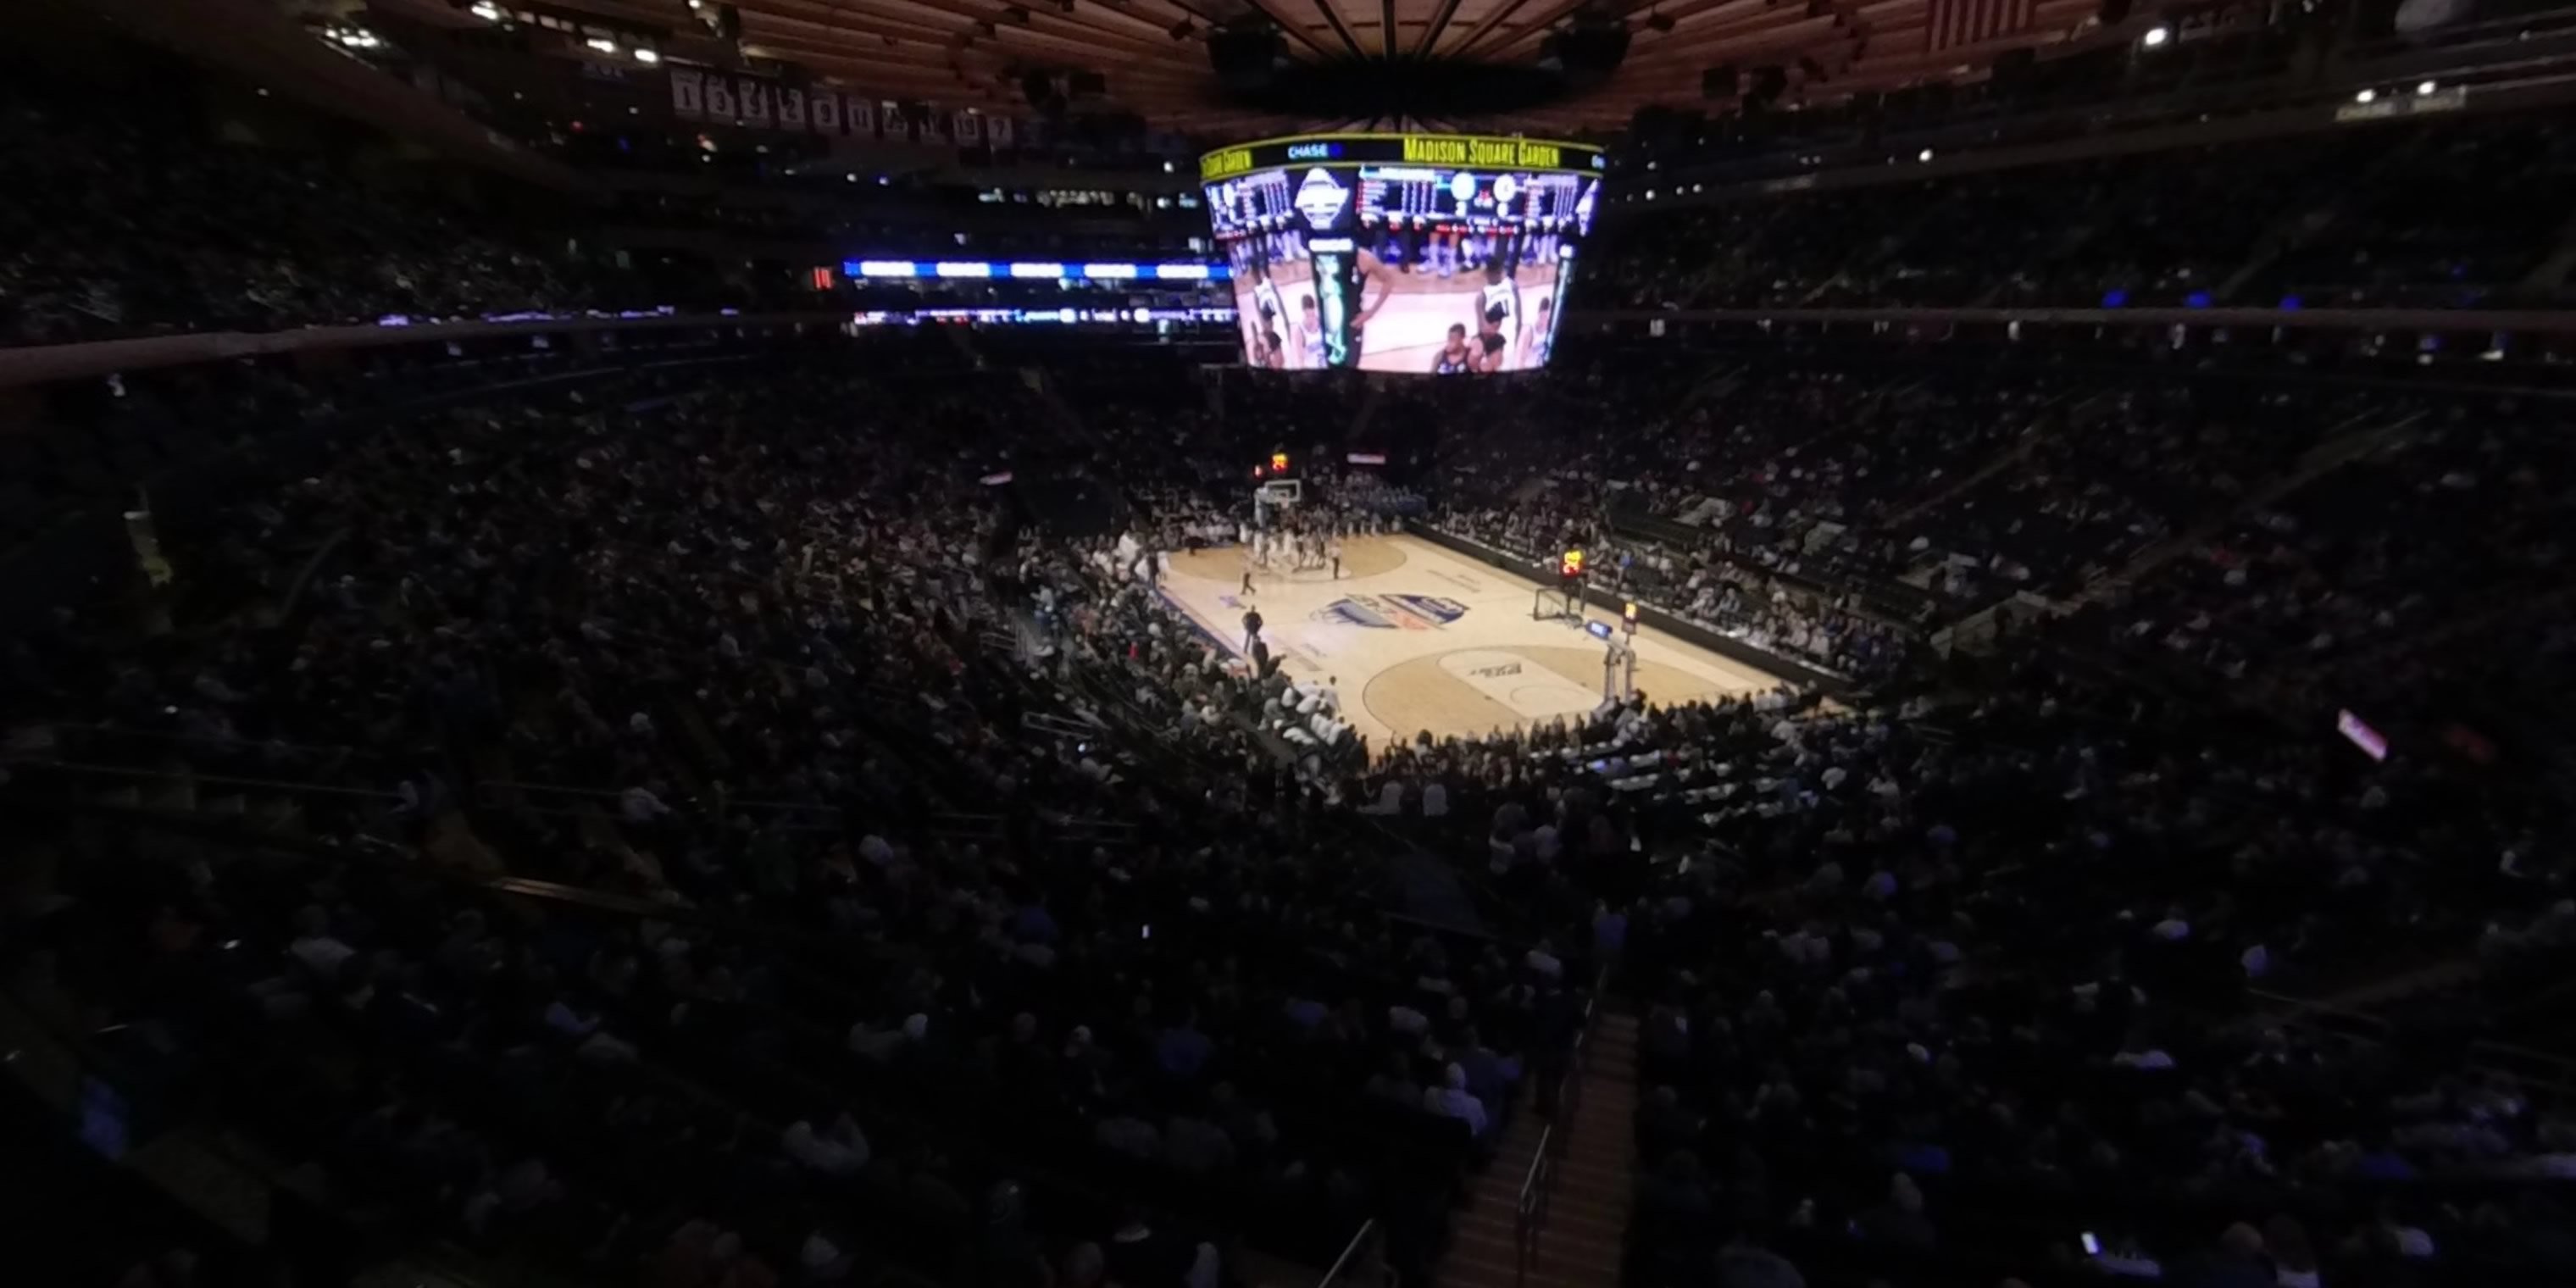 section 216 panoramic seat view  for basketball - madison square garden